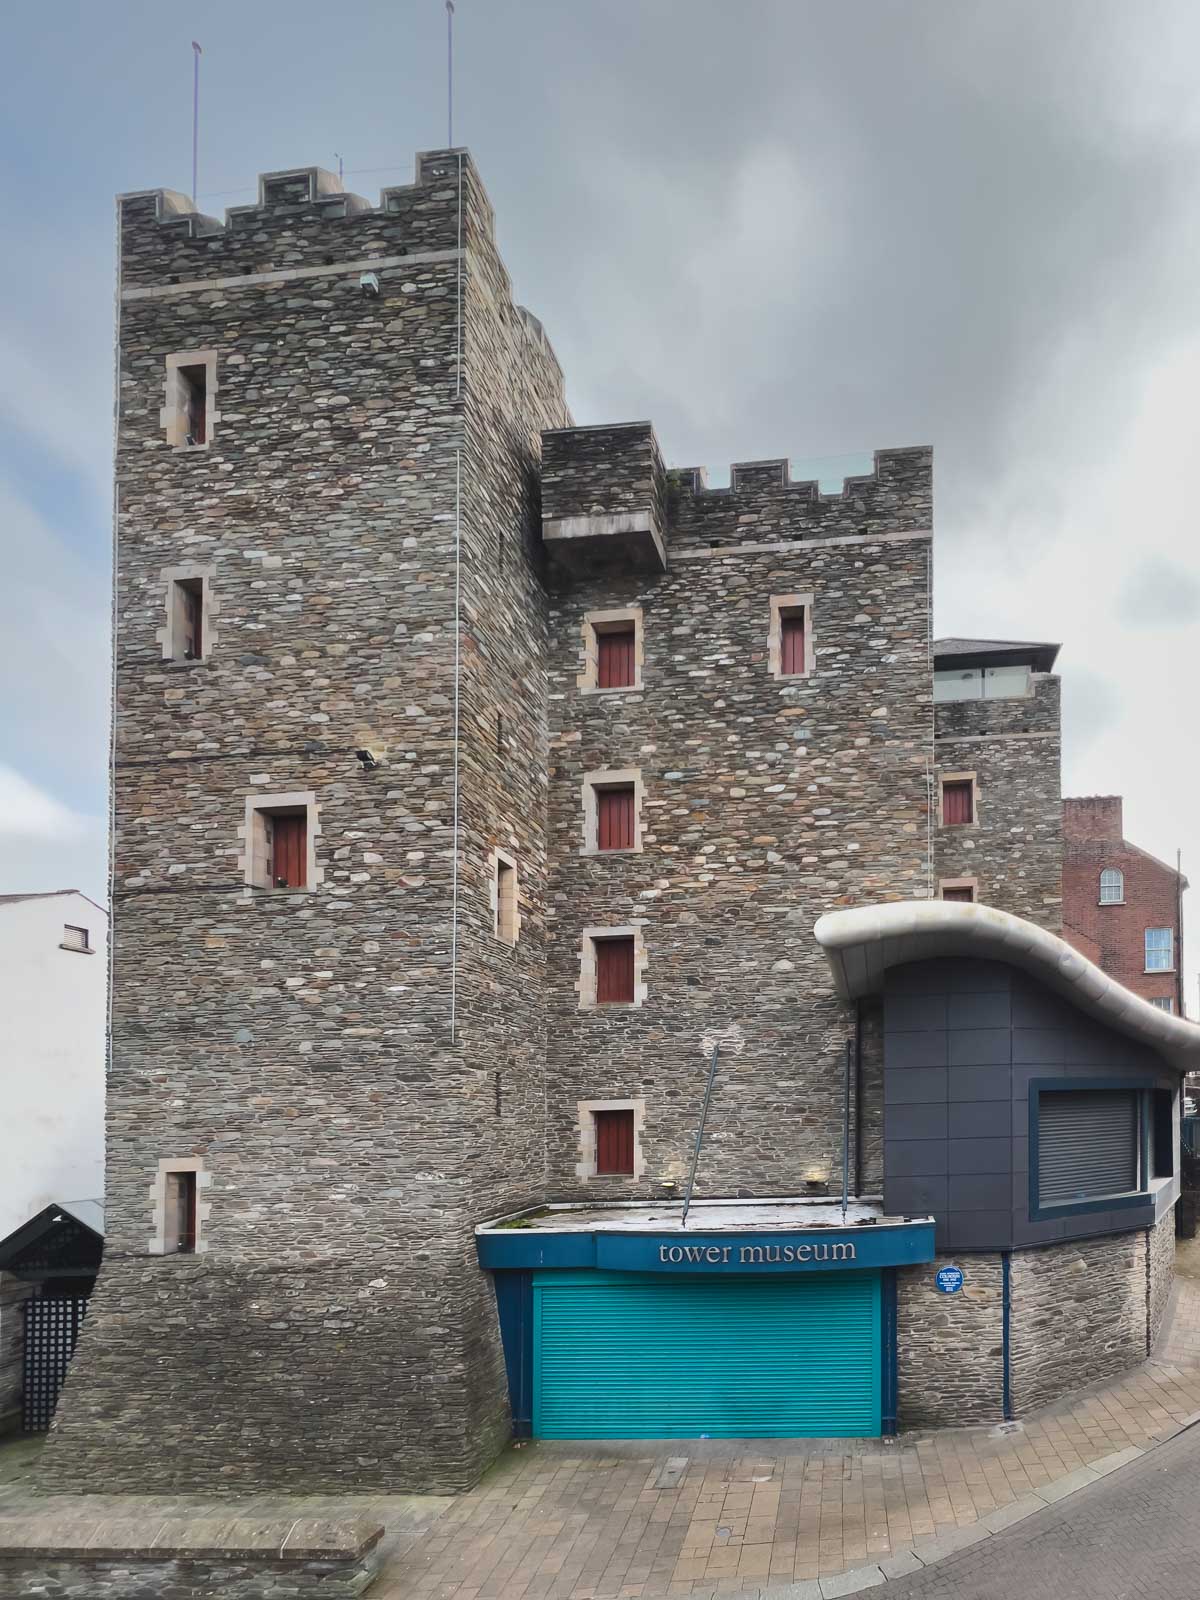 Tower Museum things to do in Derry